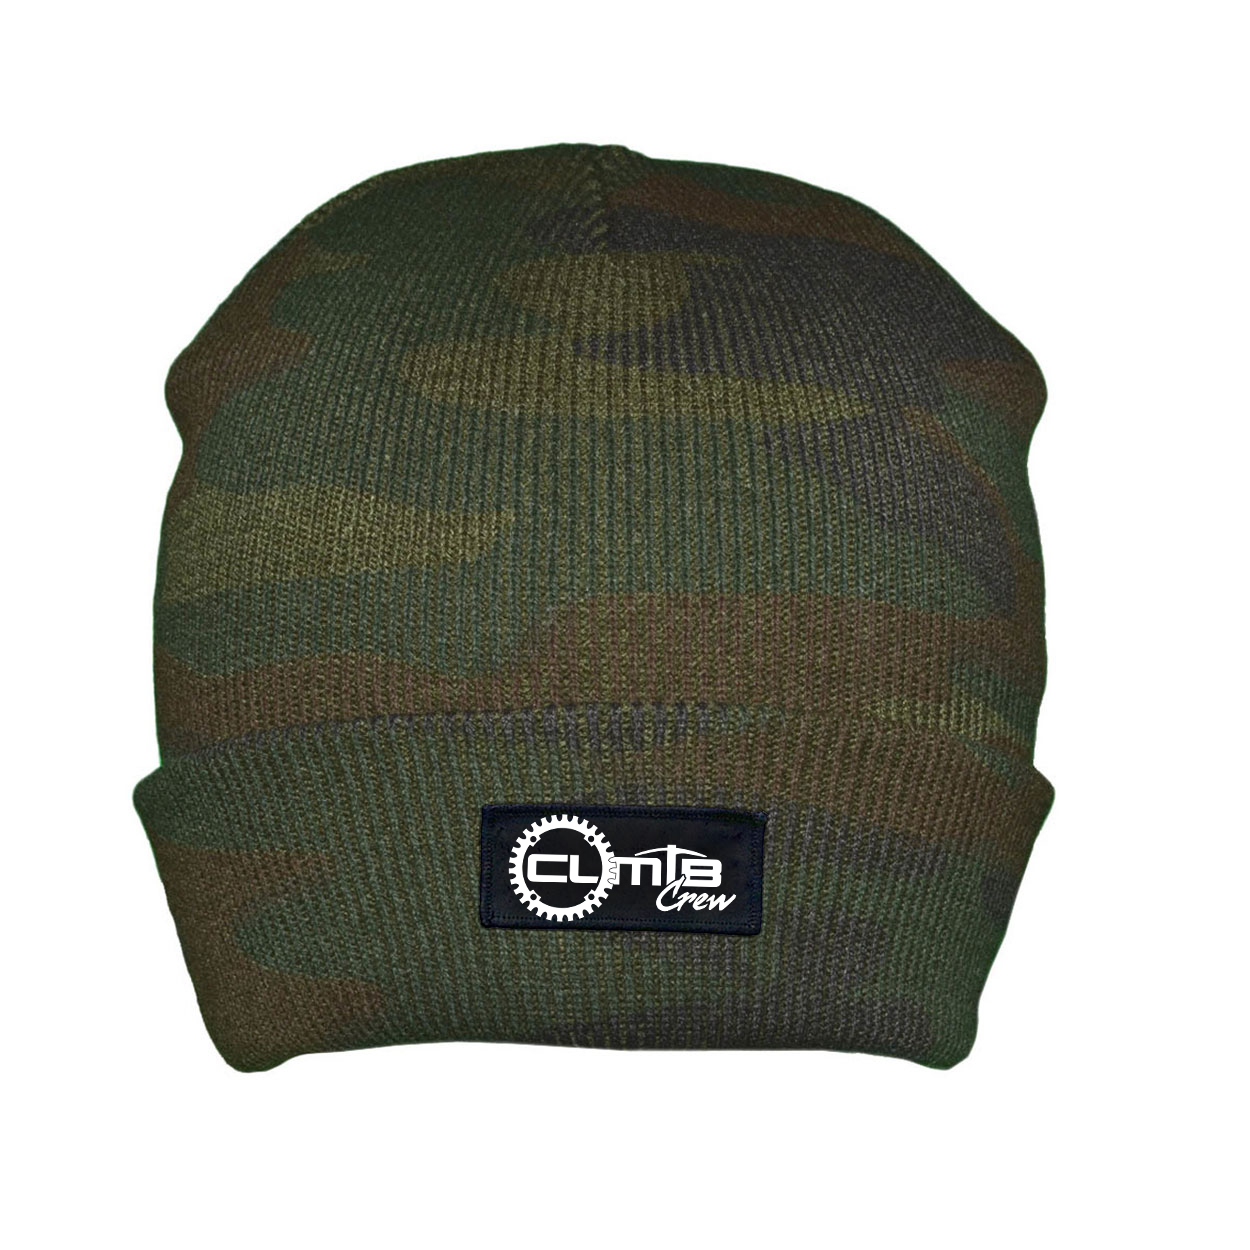 Cuyuna Lakes Mountain Bike Crew Night Out Woven Patch Roll Up Skully Beanie Camo